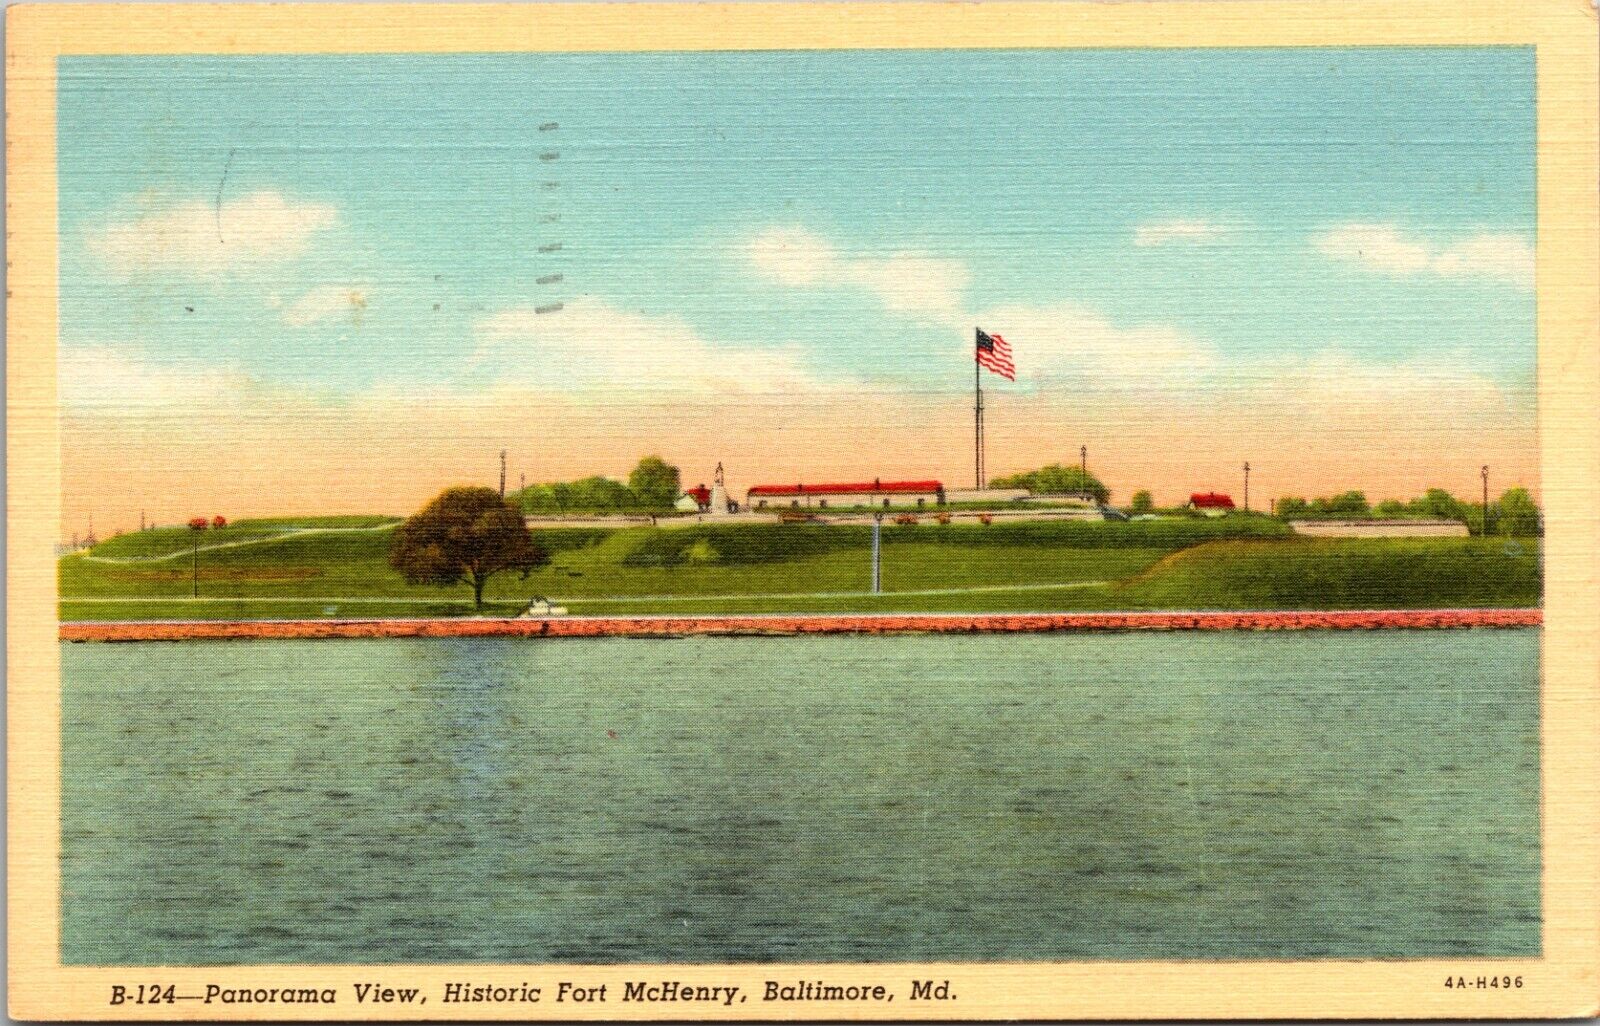 PANORAMA VIEW OF FT FORT MCHENRY FROM WATER POSTCARD BALTIMORE MD MARYLAND 1942